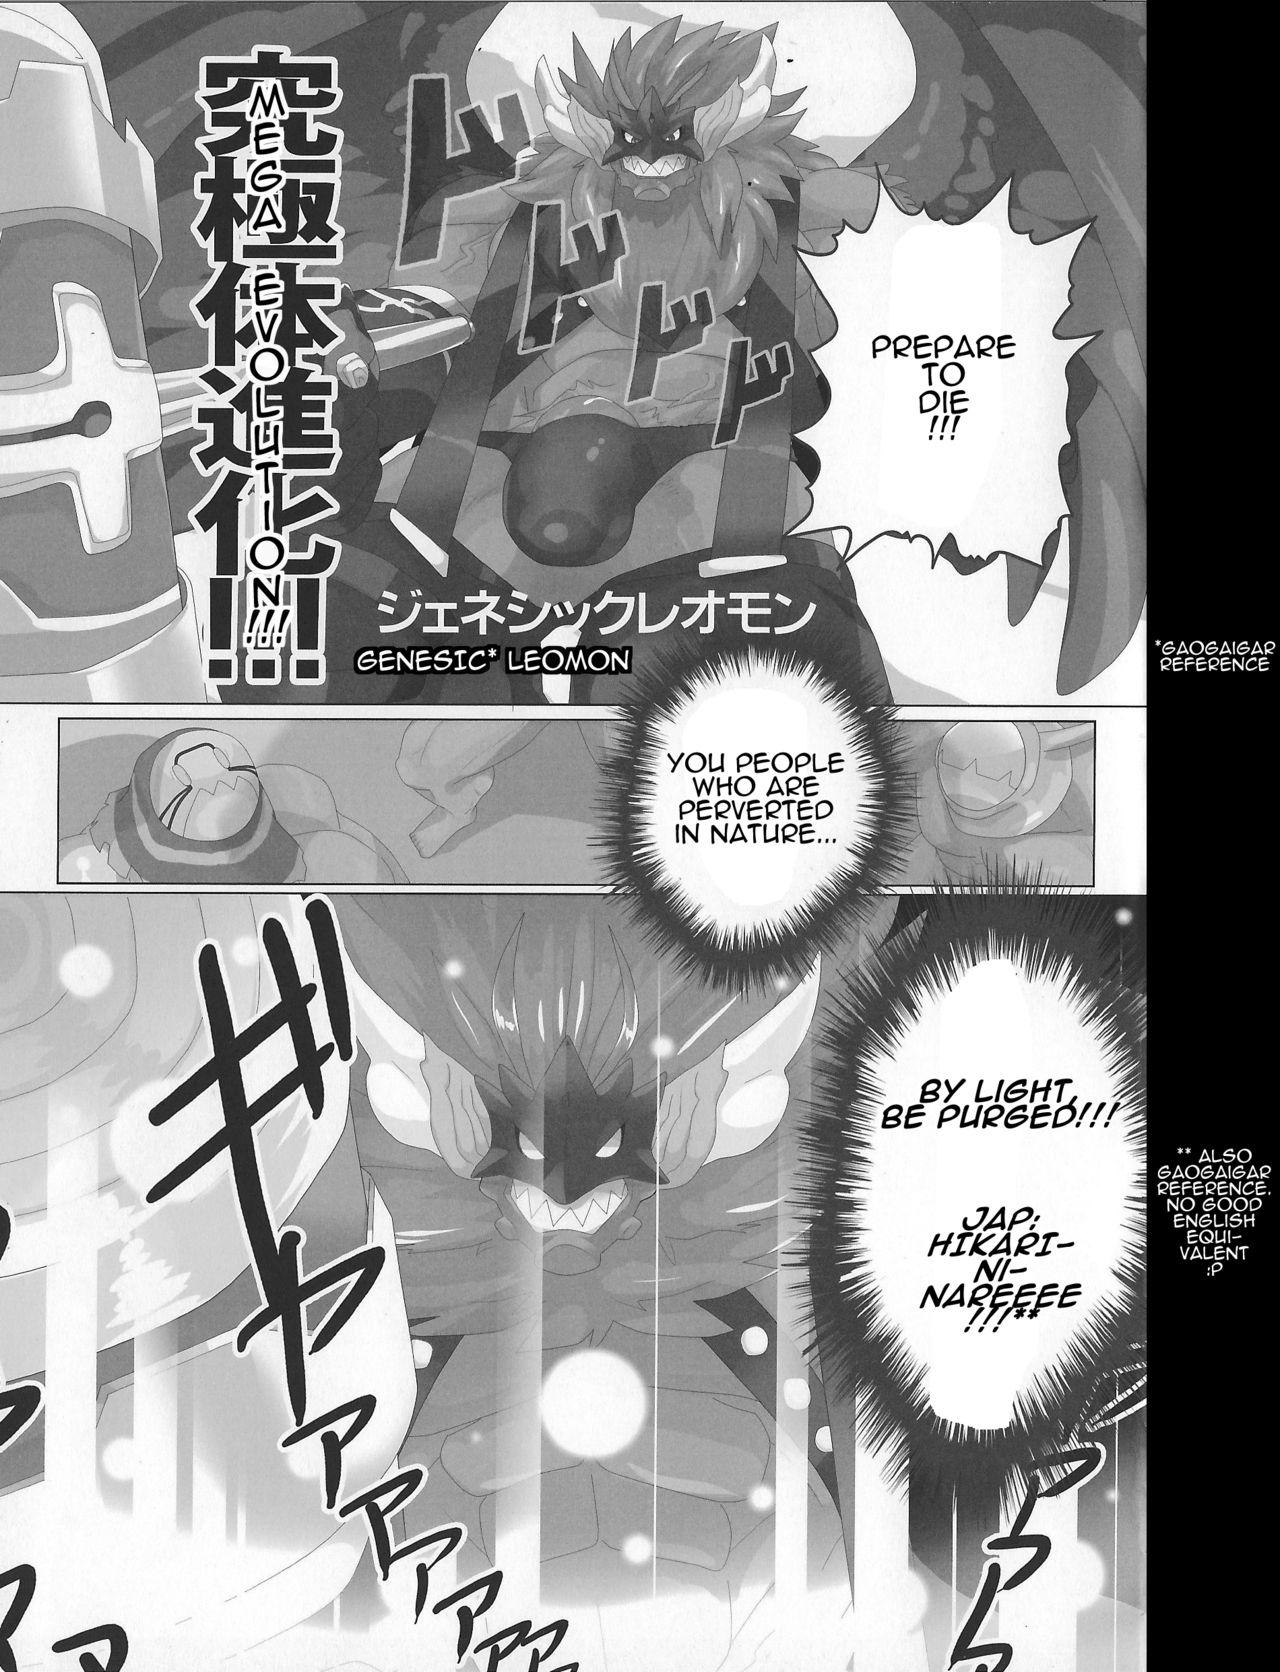 [Debirobu] For the Lion-Man Type Electric Life Form to Overturn Fate - Leomon Doujin [ENG] 23